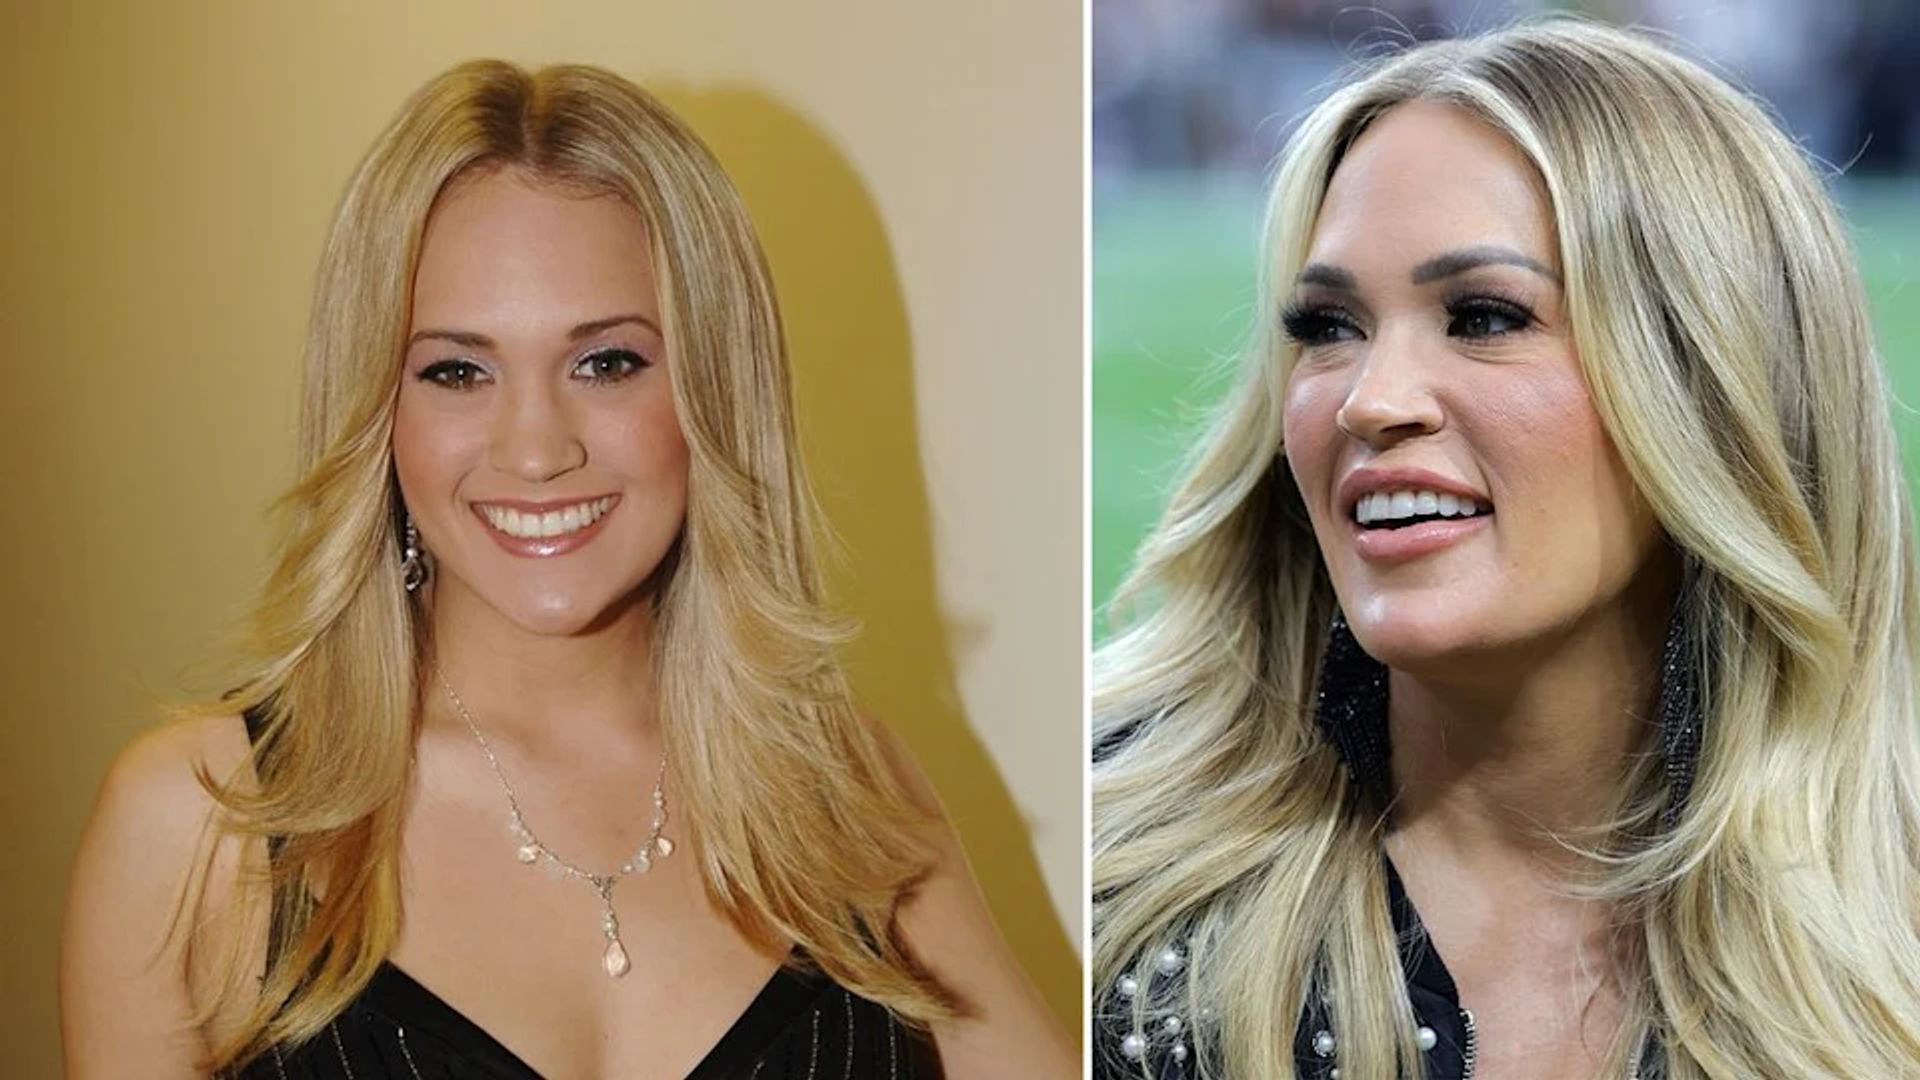 What happened to Carrie Underwood?